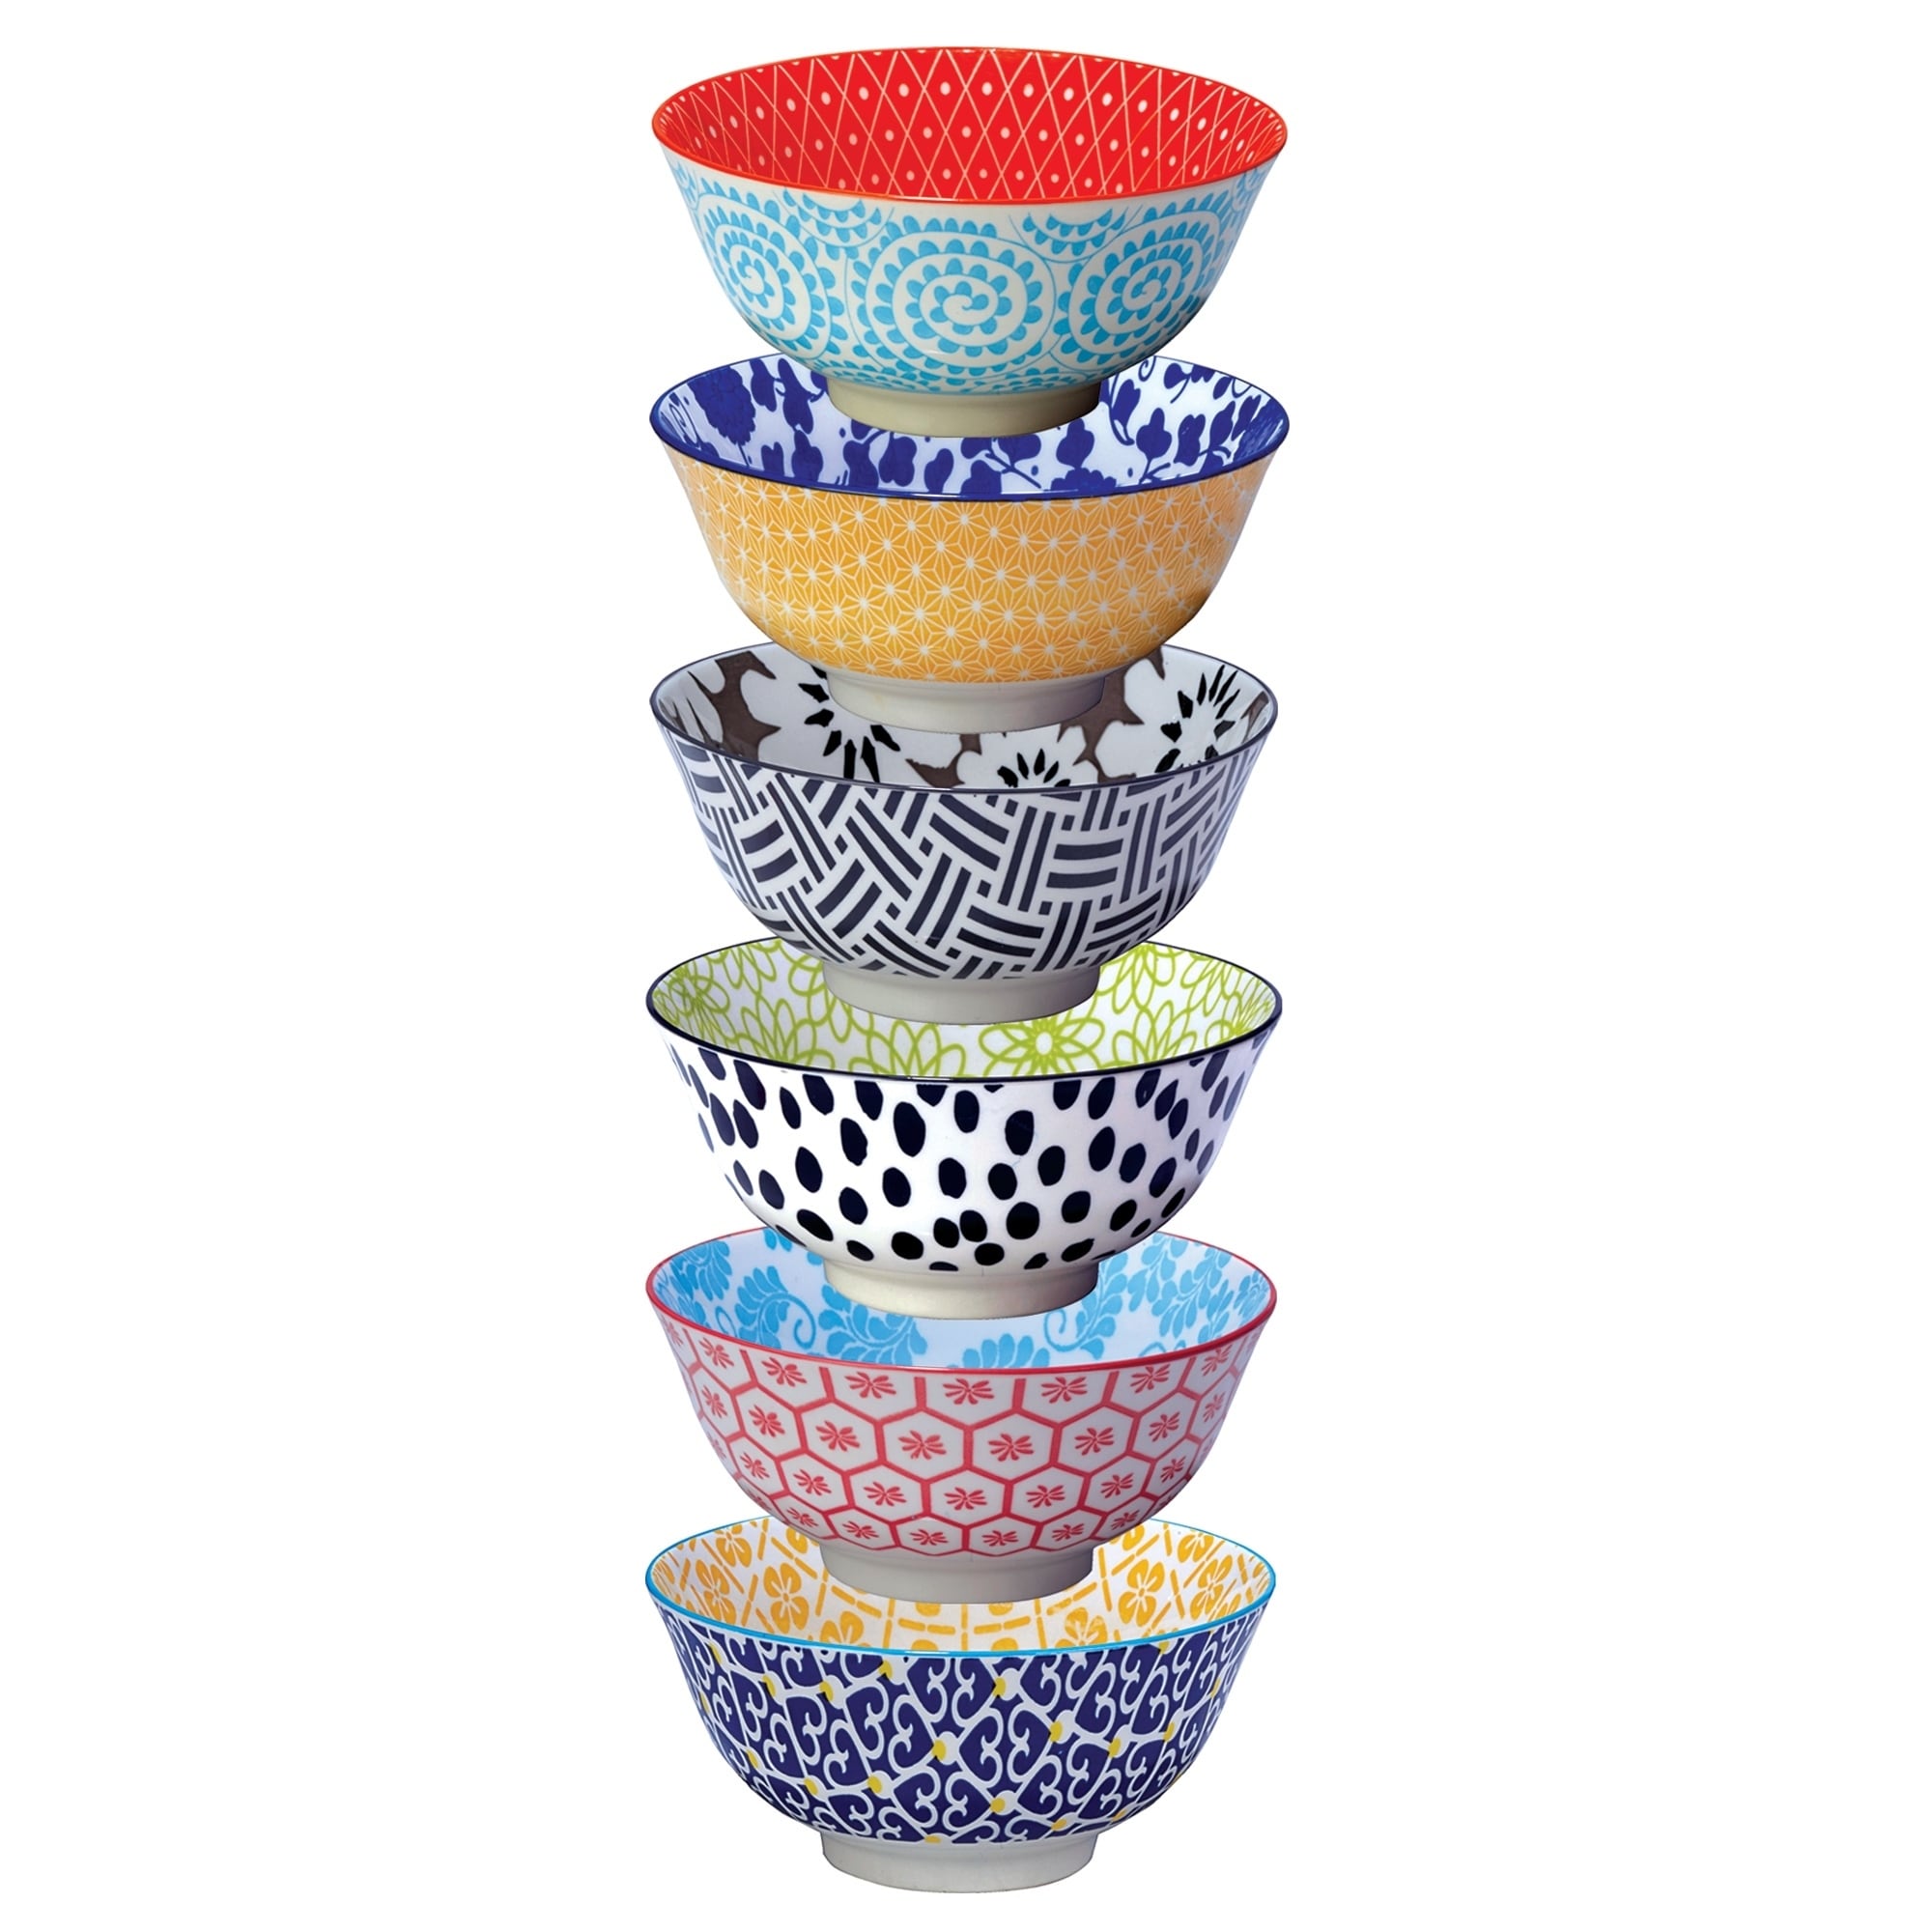 Navy Blue Melamine Mixing Bowls with Lid - Set of 6